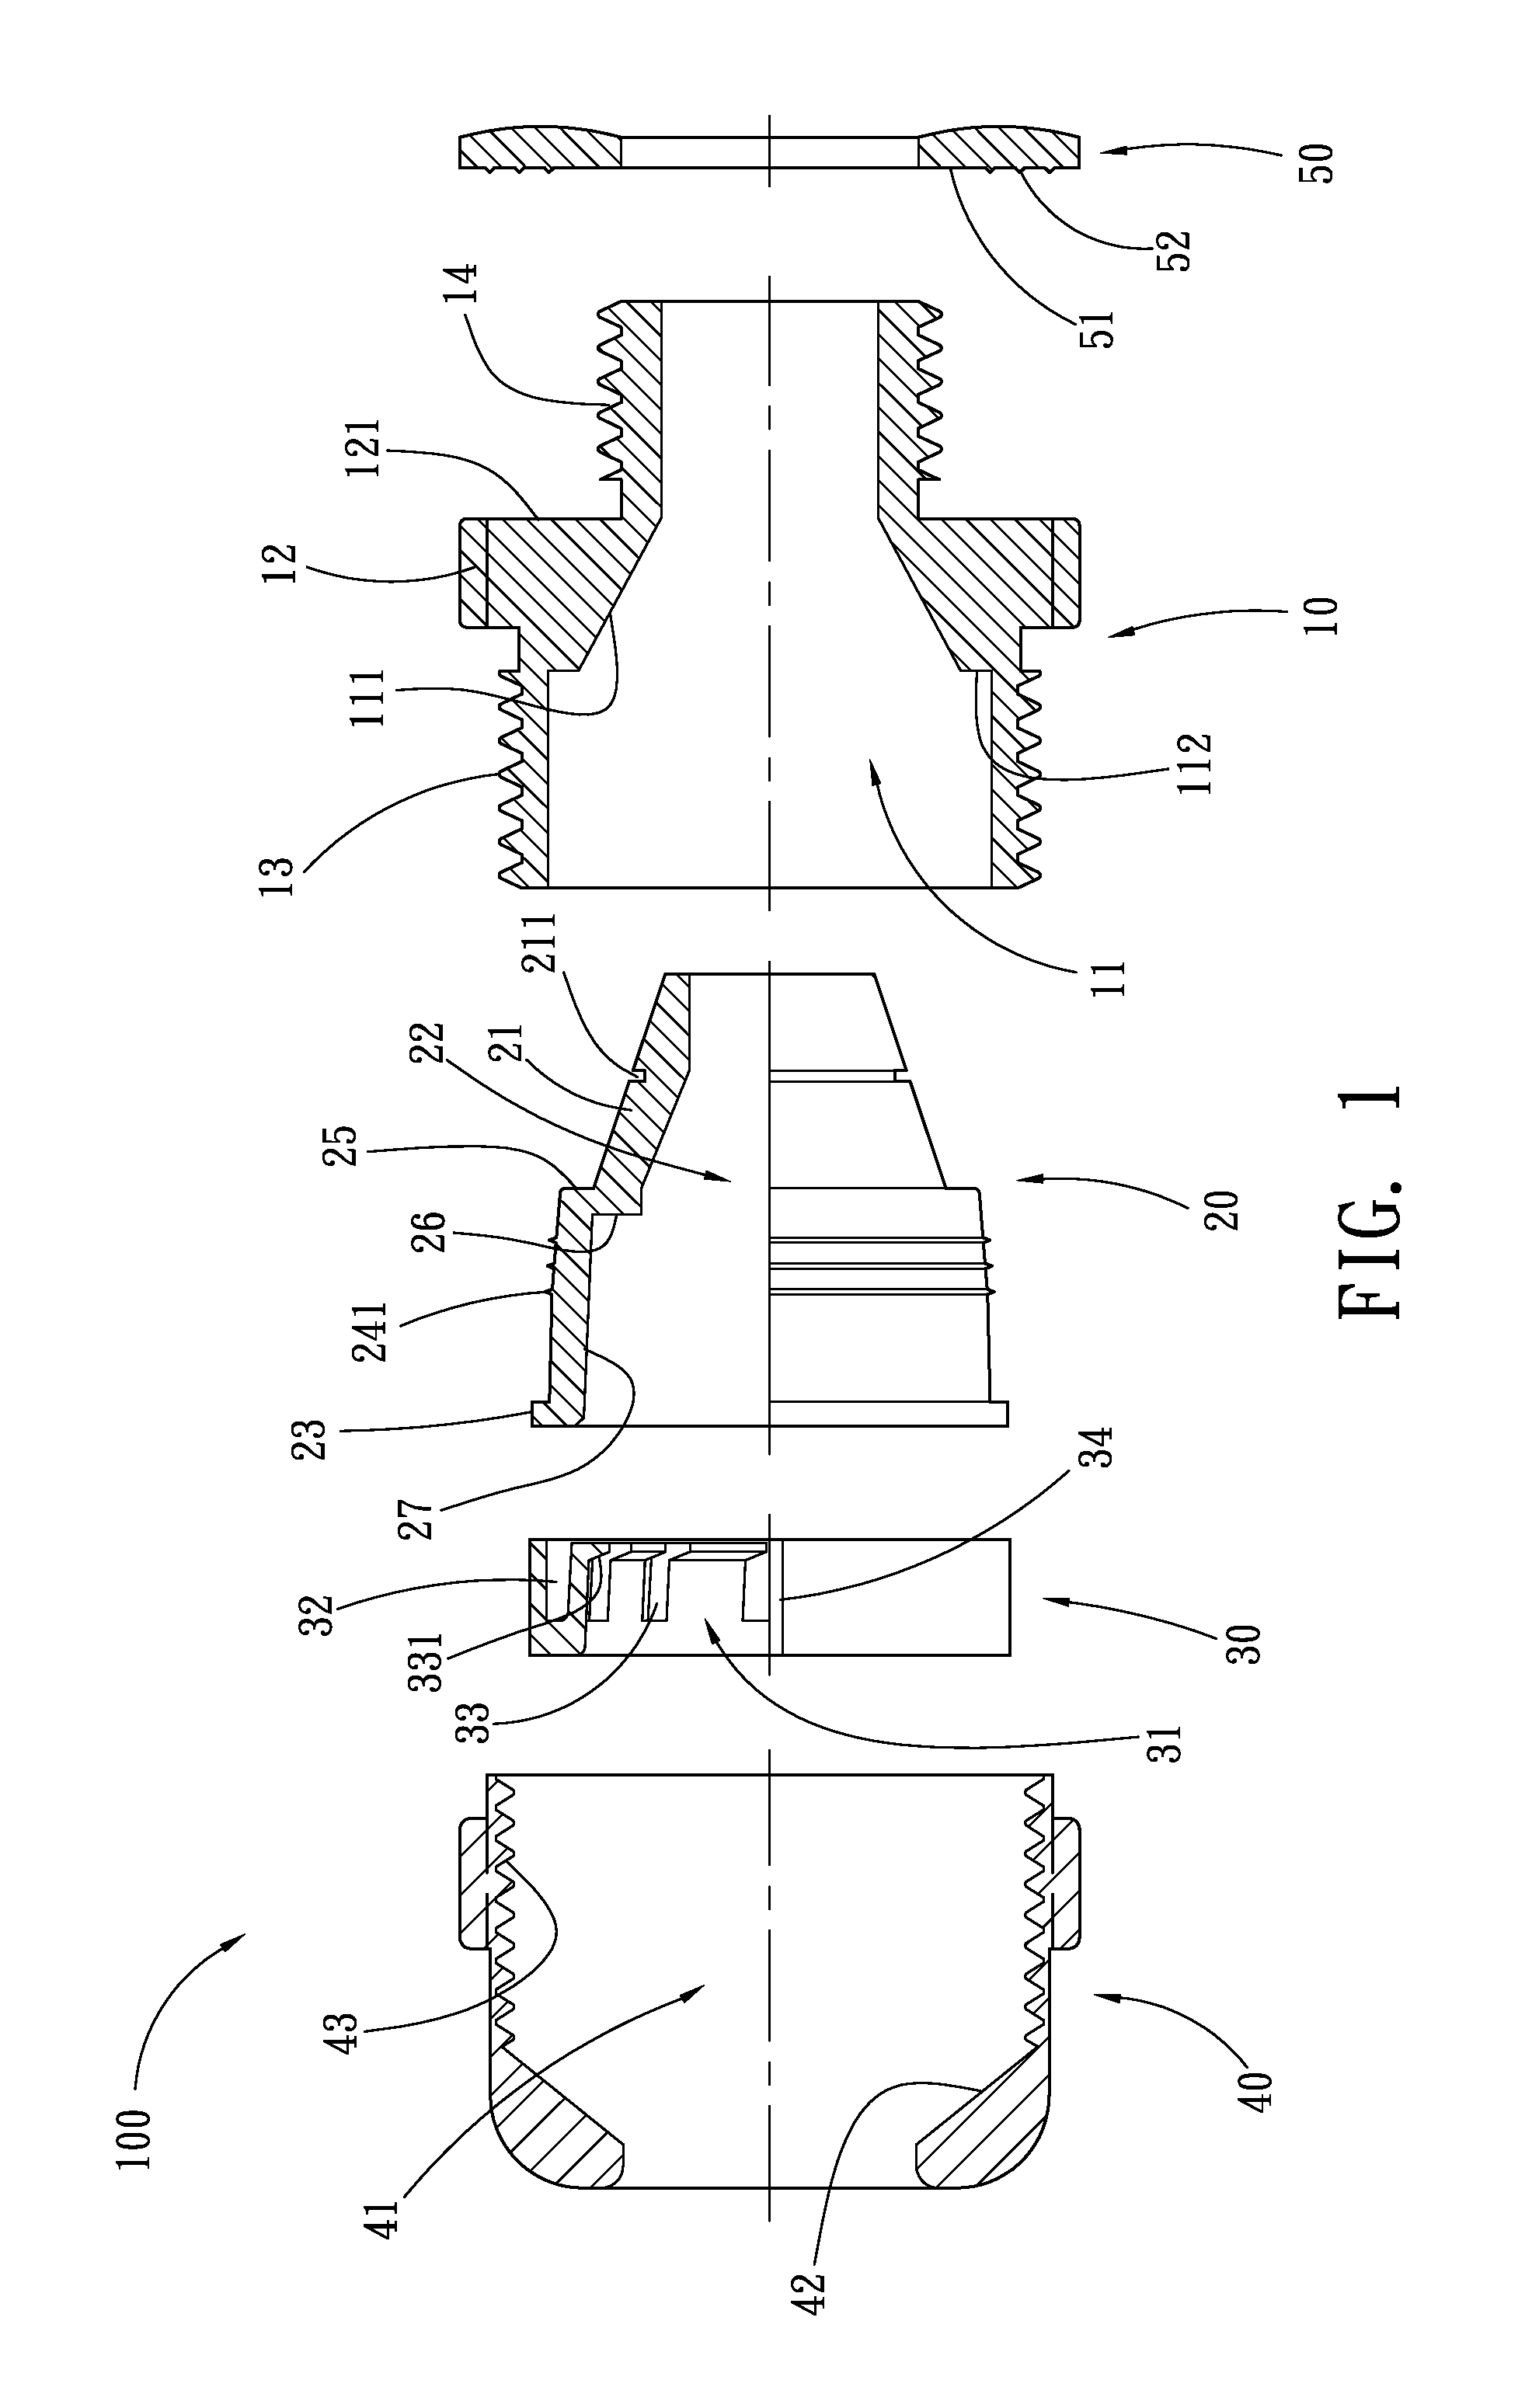 Cable and flexible conduit gland